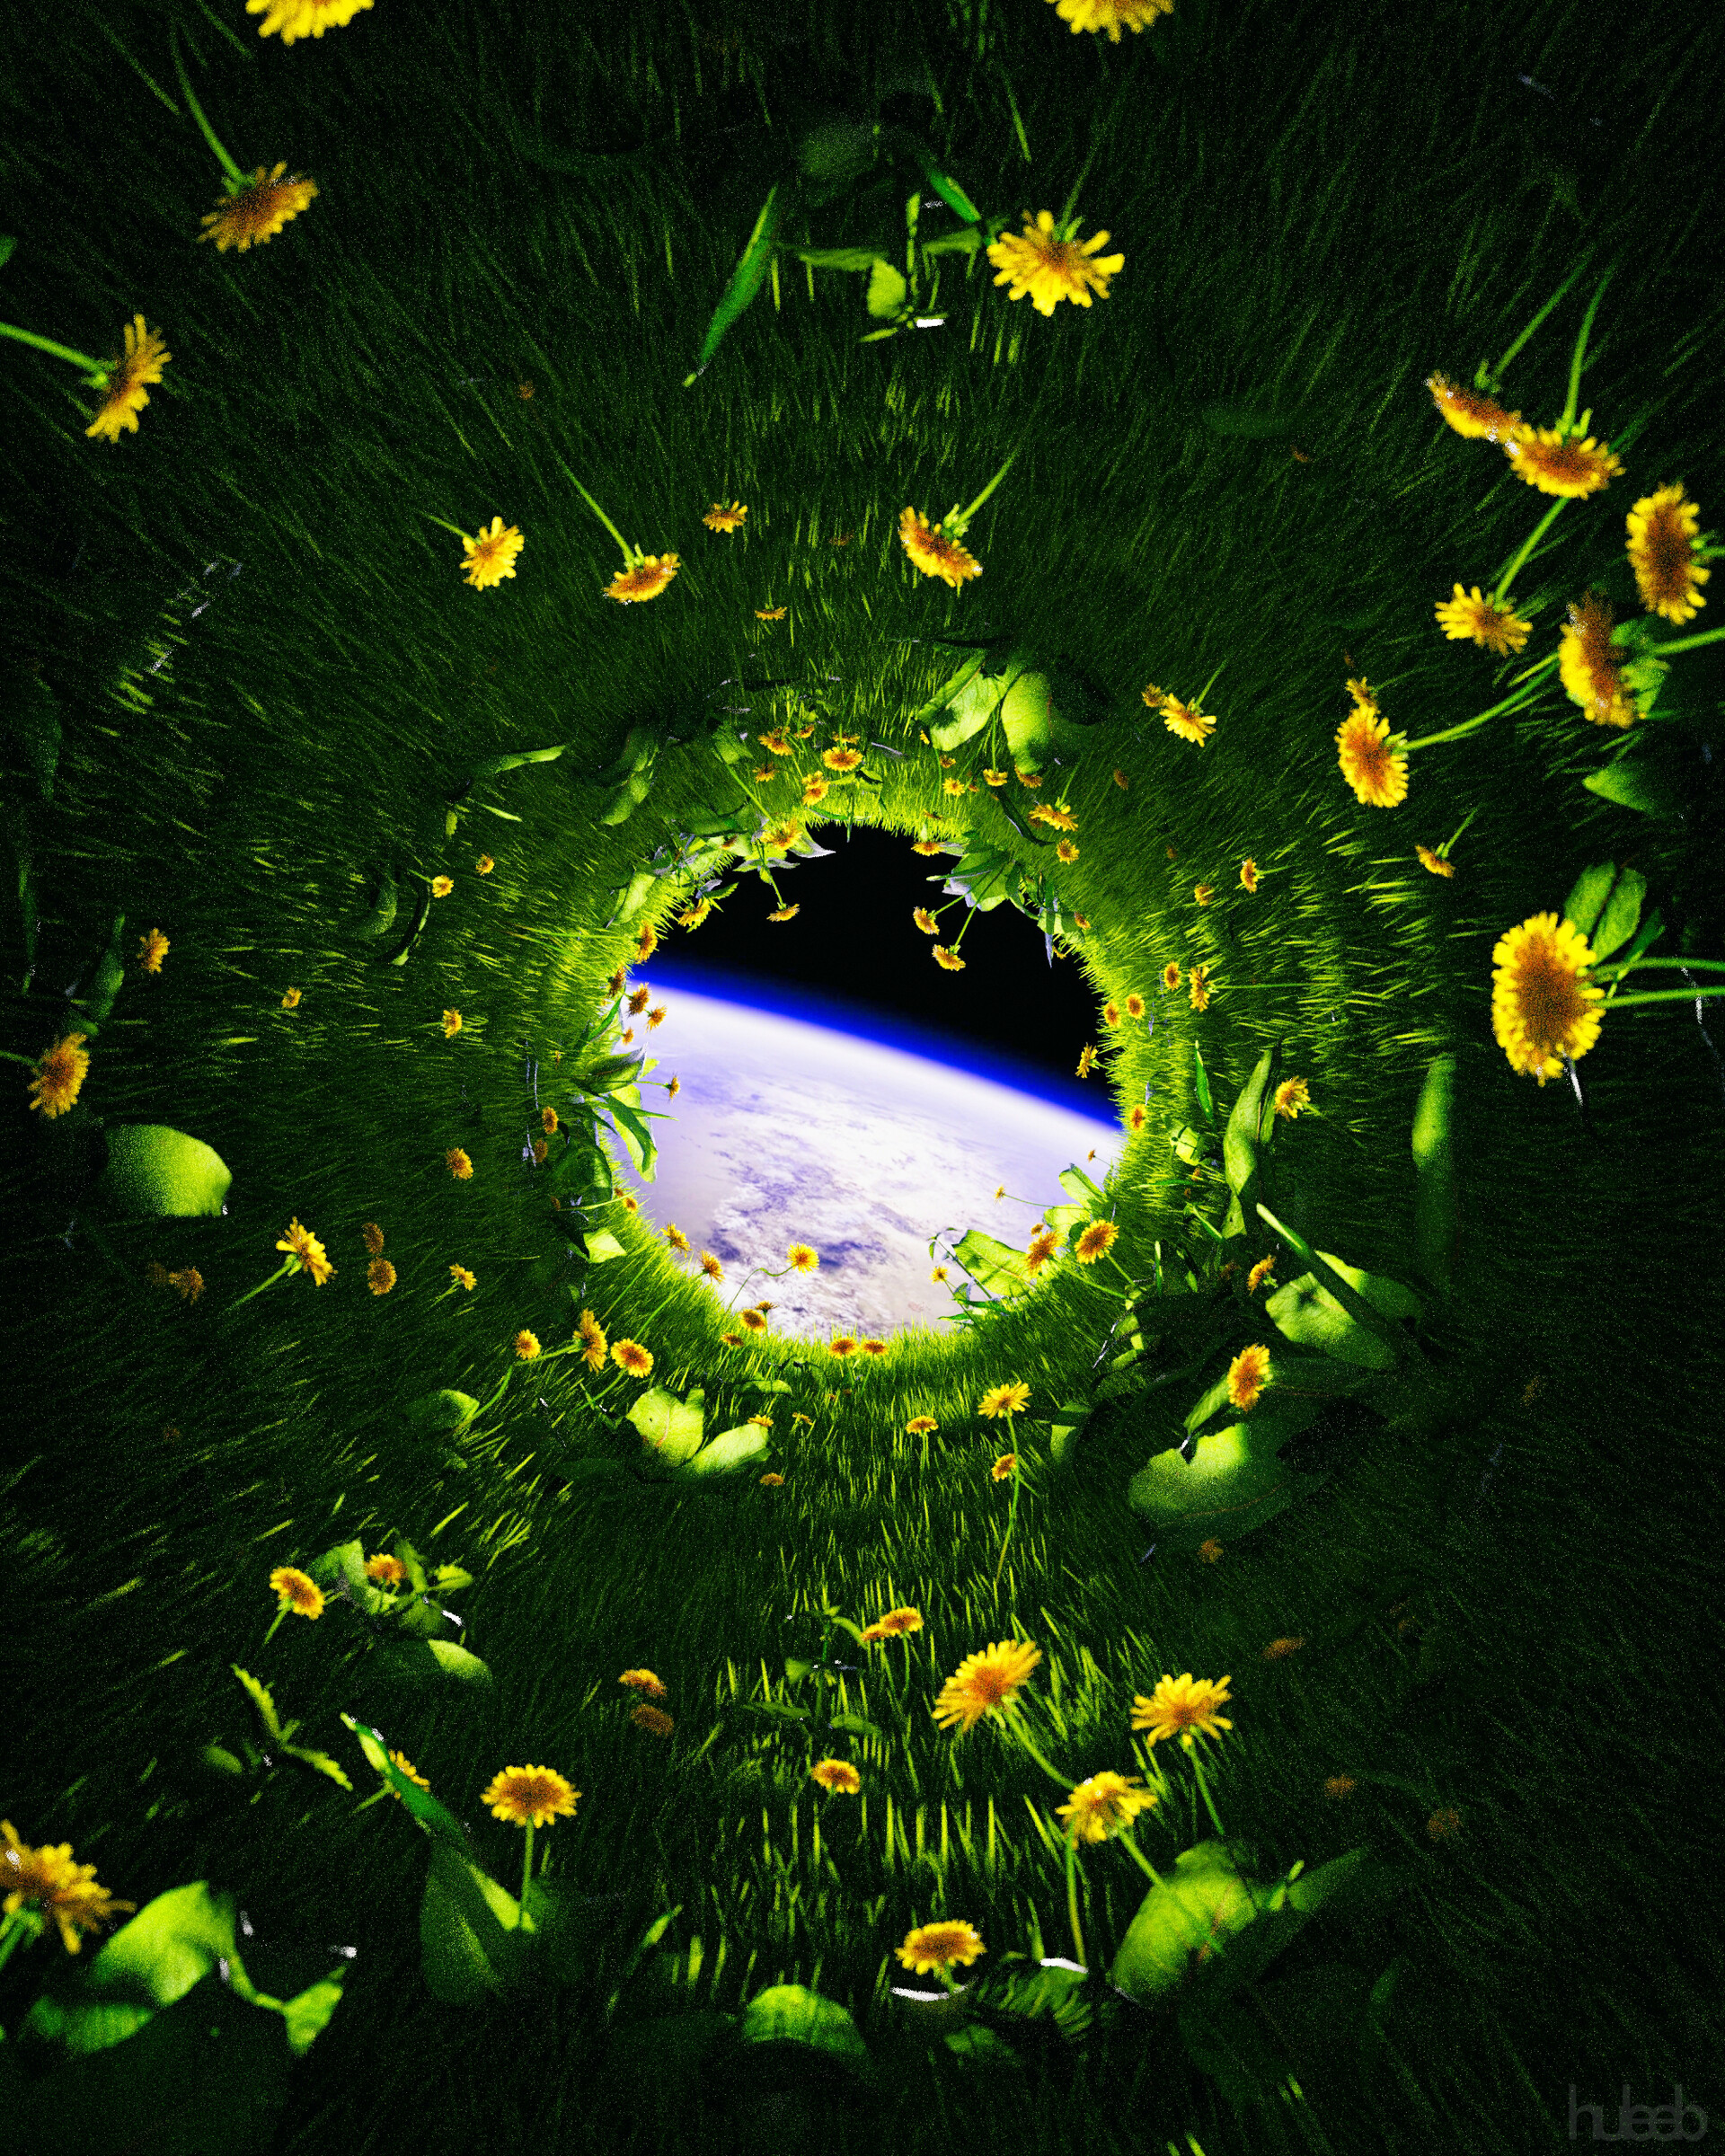 Cool Wallpapers miscellanea, flowers, grass, universe, dandelions, miscellaneous, land, earth